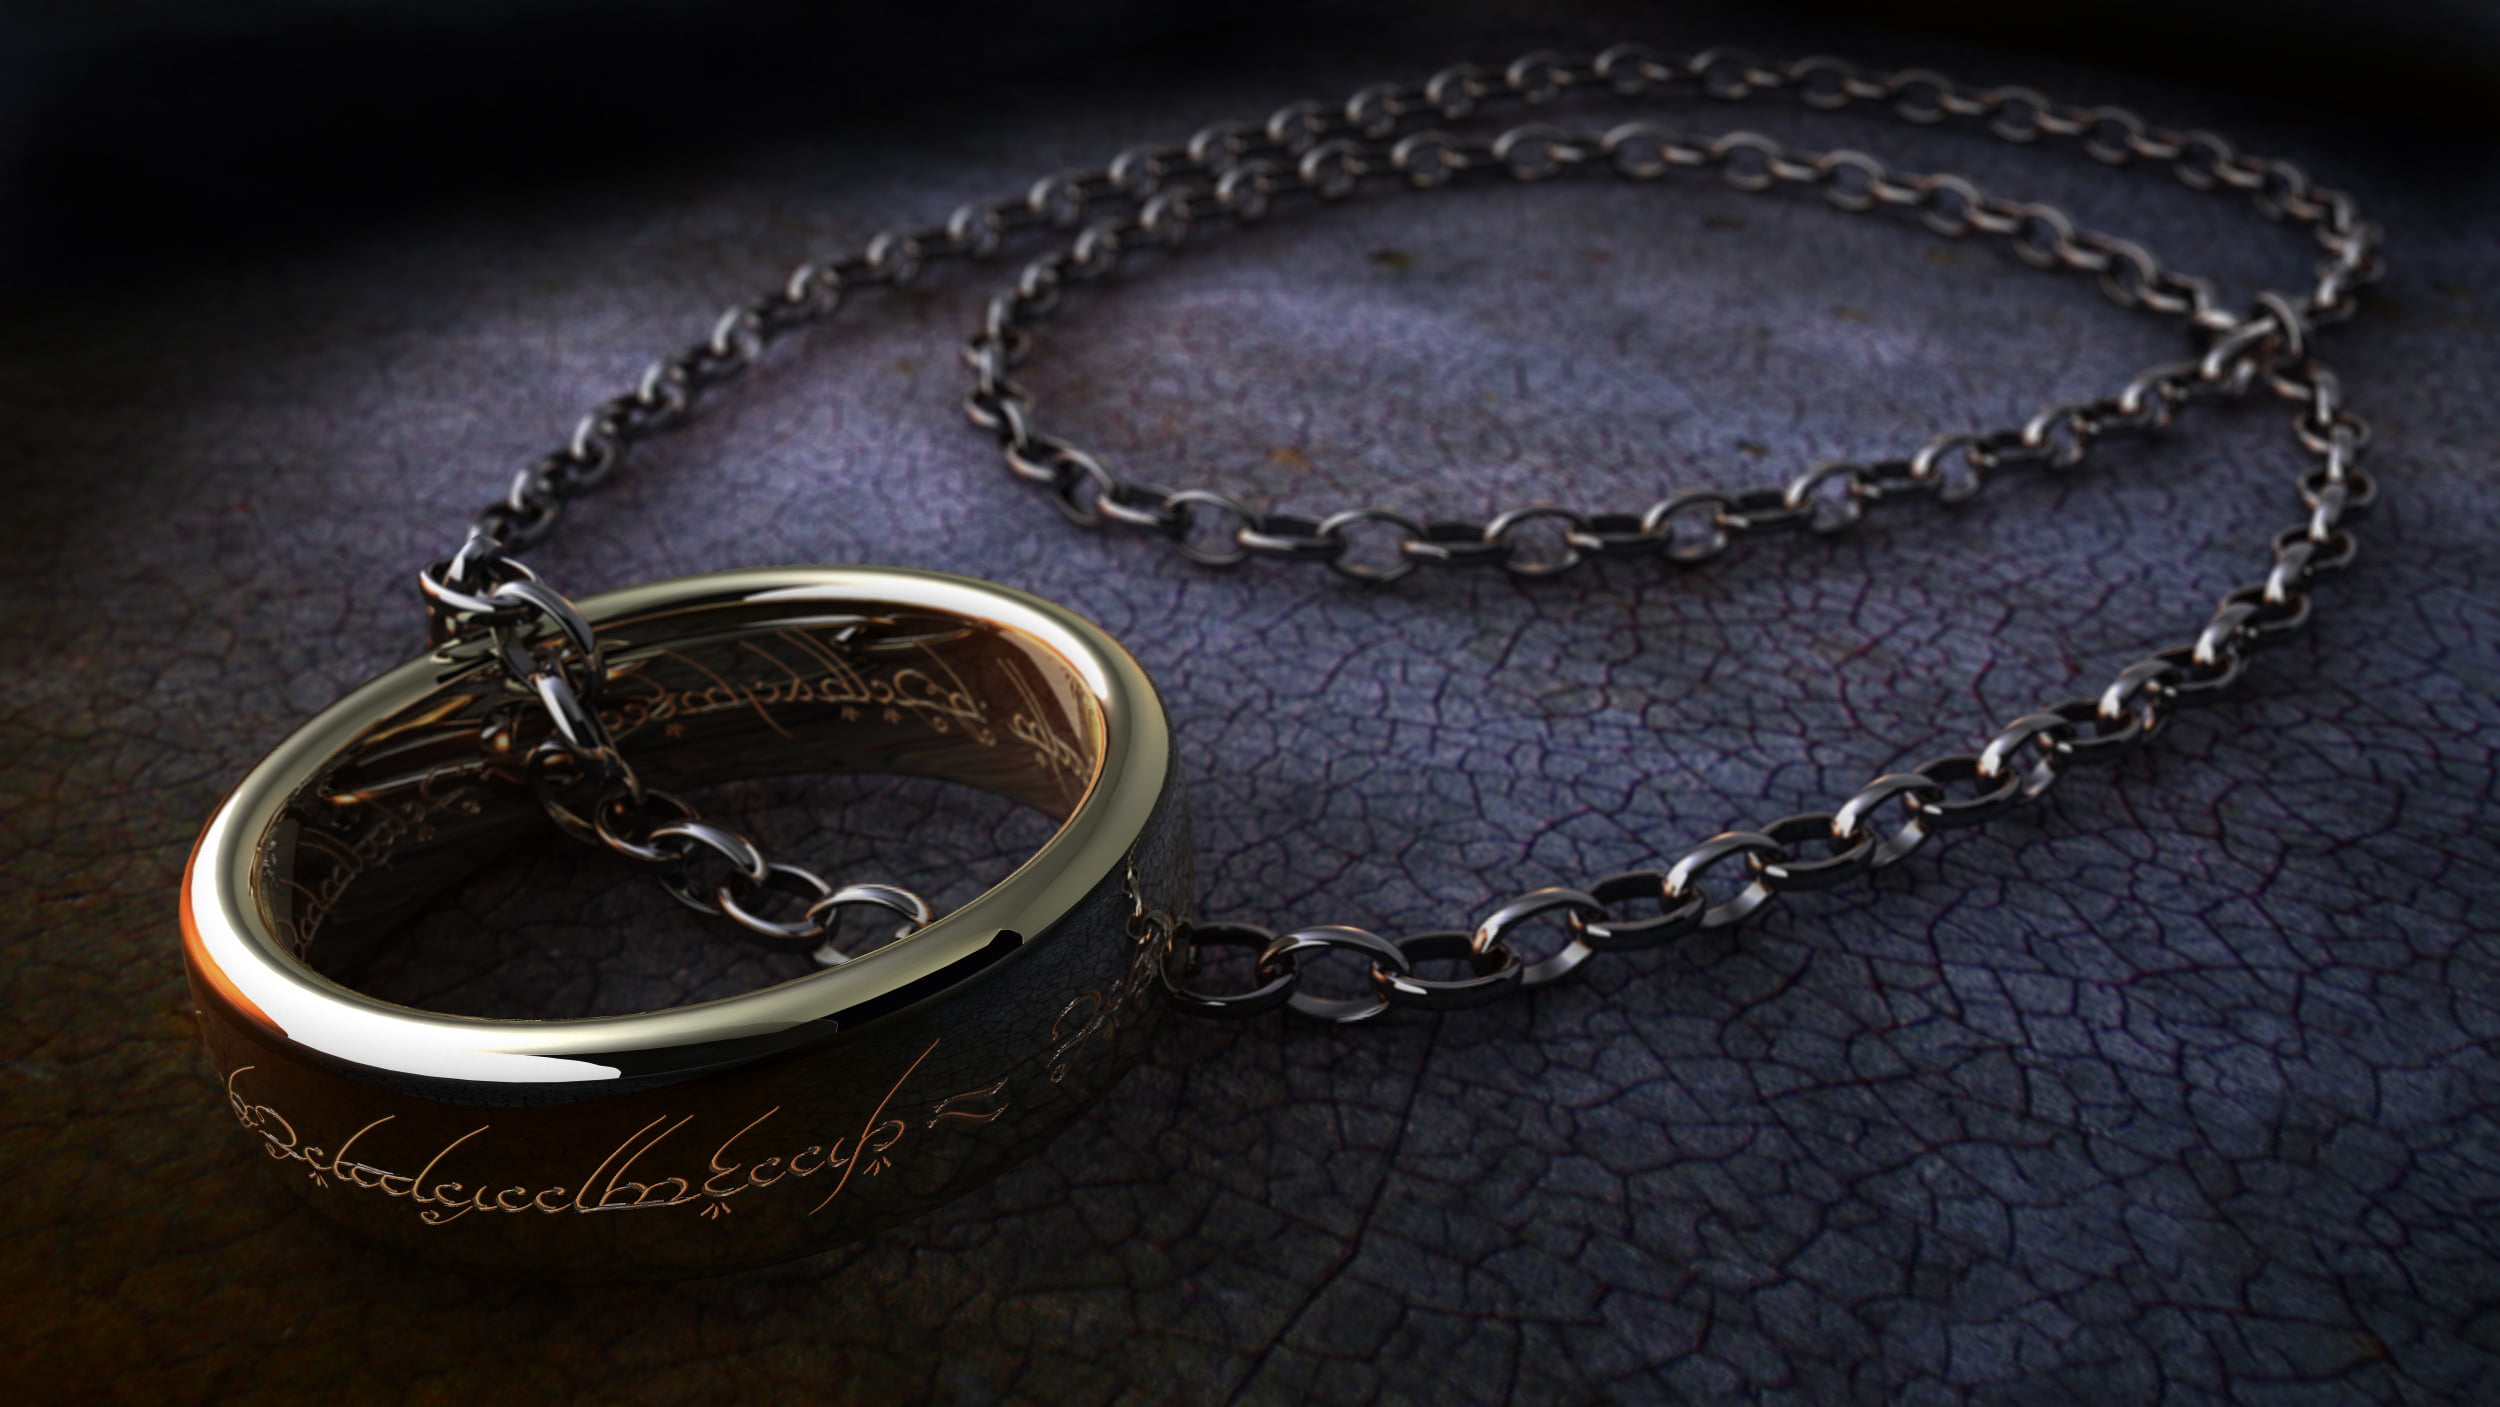 The Lord of the Ring ring illustration, surface, labels, the Lord of the rings